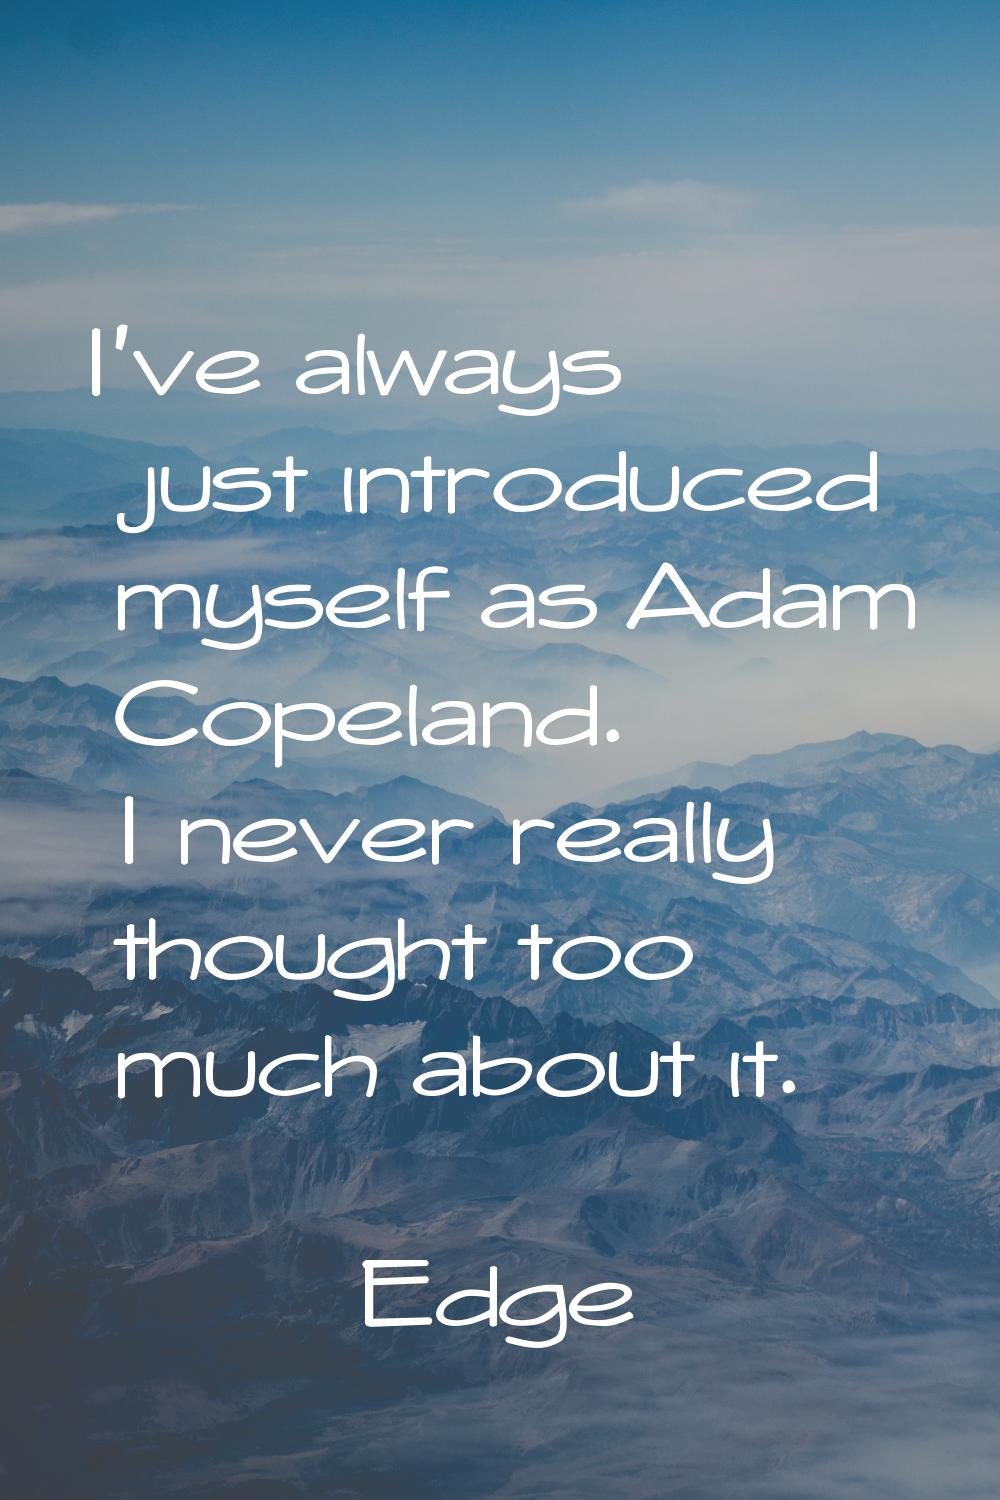 I've always just introduced myself as Adam Copeland. I never really thought too much about it.